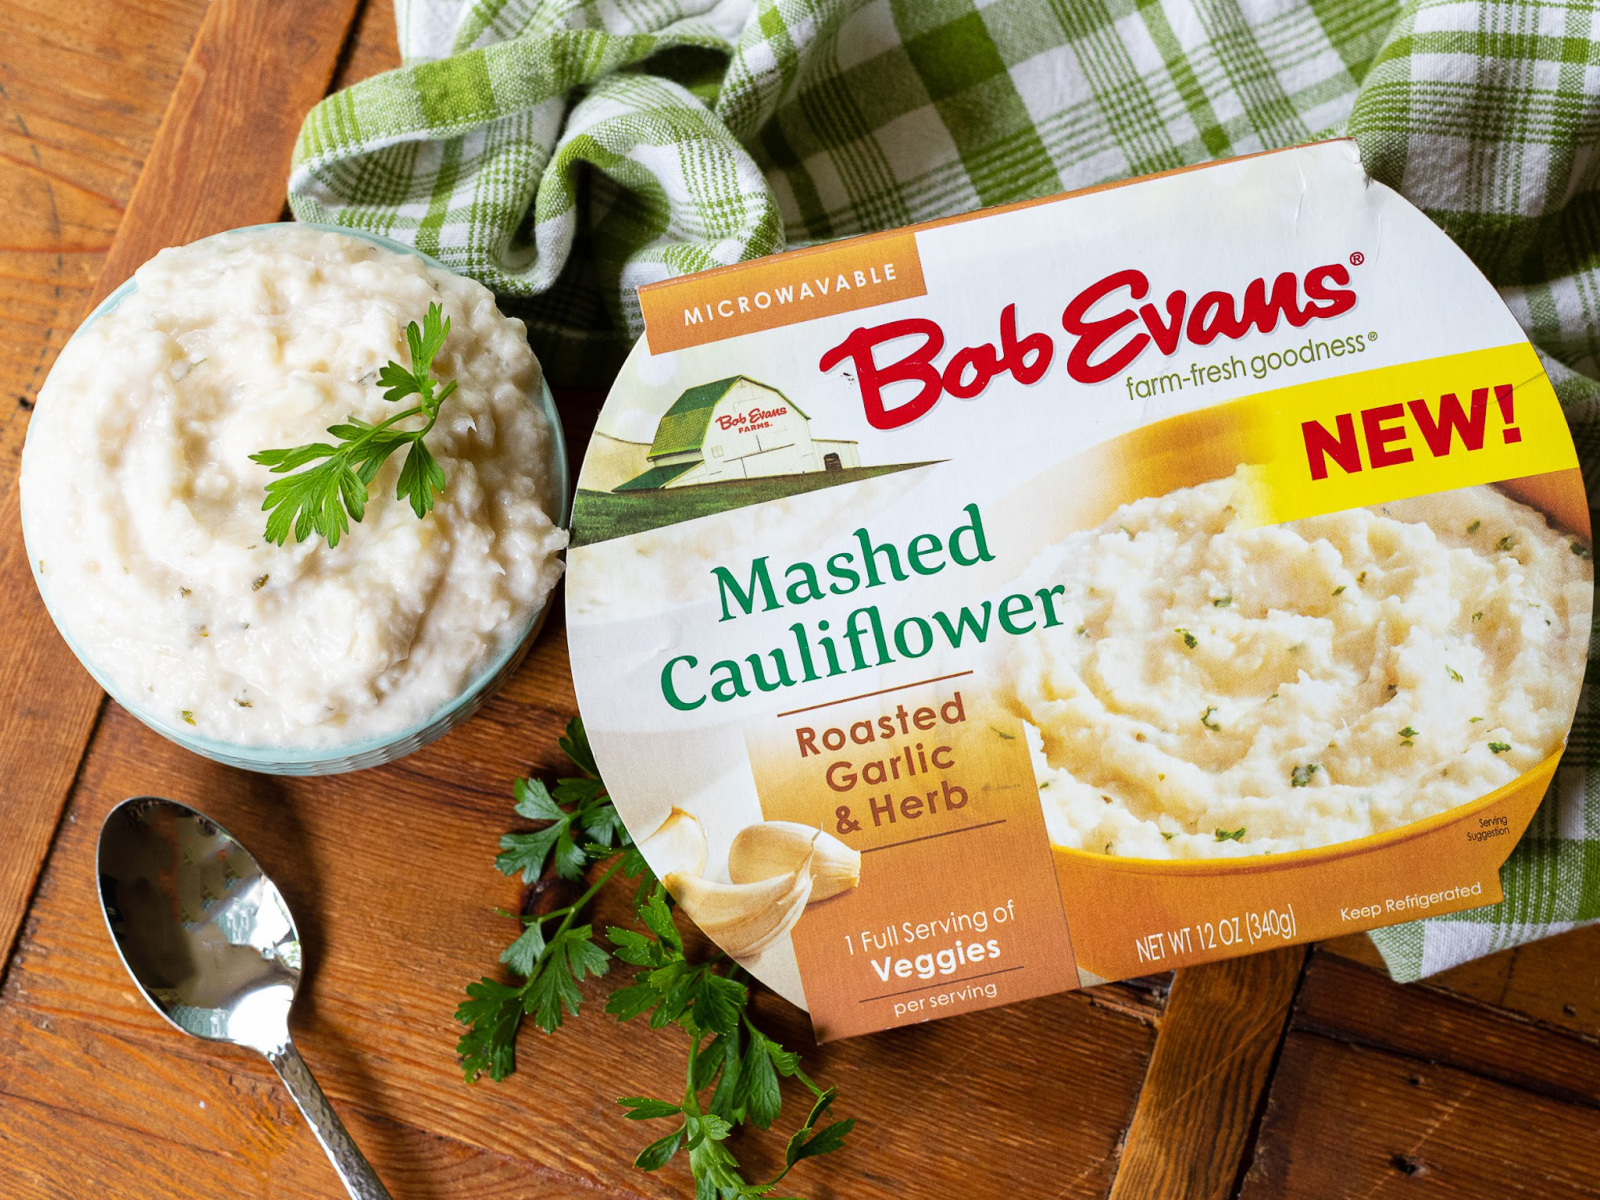 Bob Evans Mashed Cauliflower Side Dishes As Low As $1.99 At Kroger